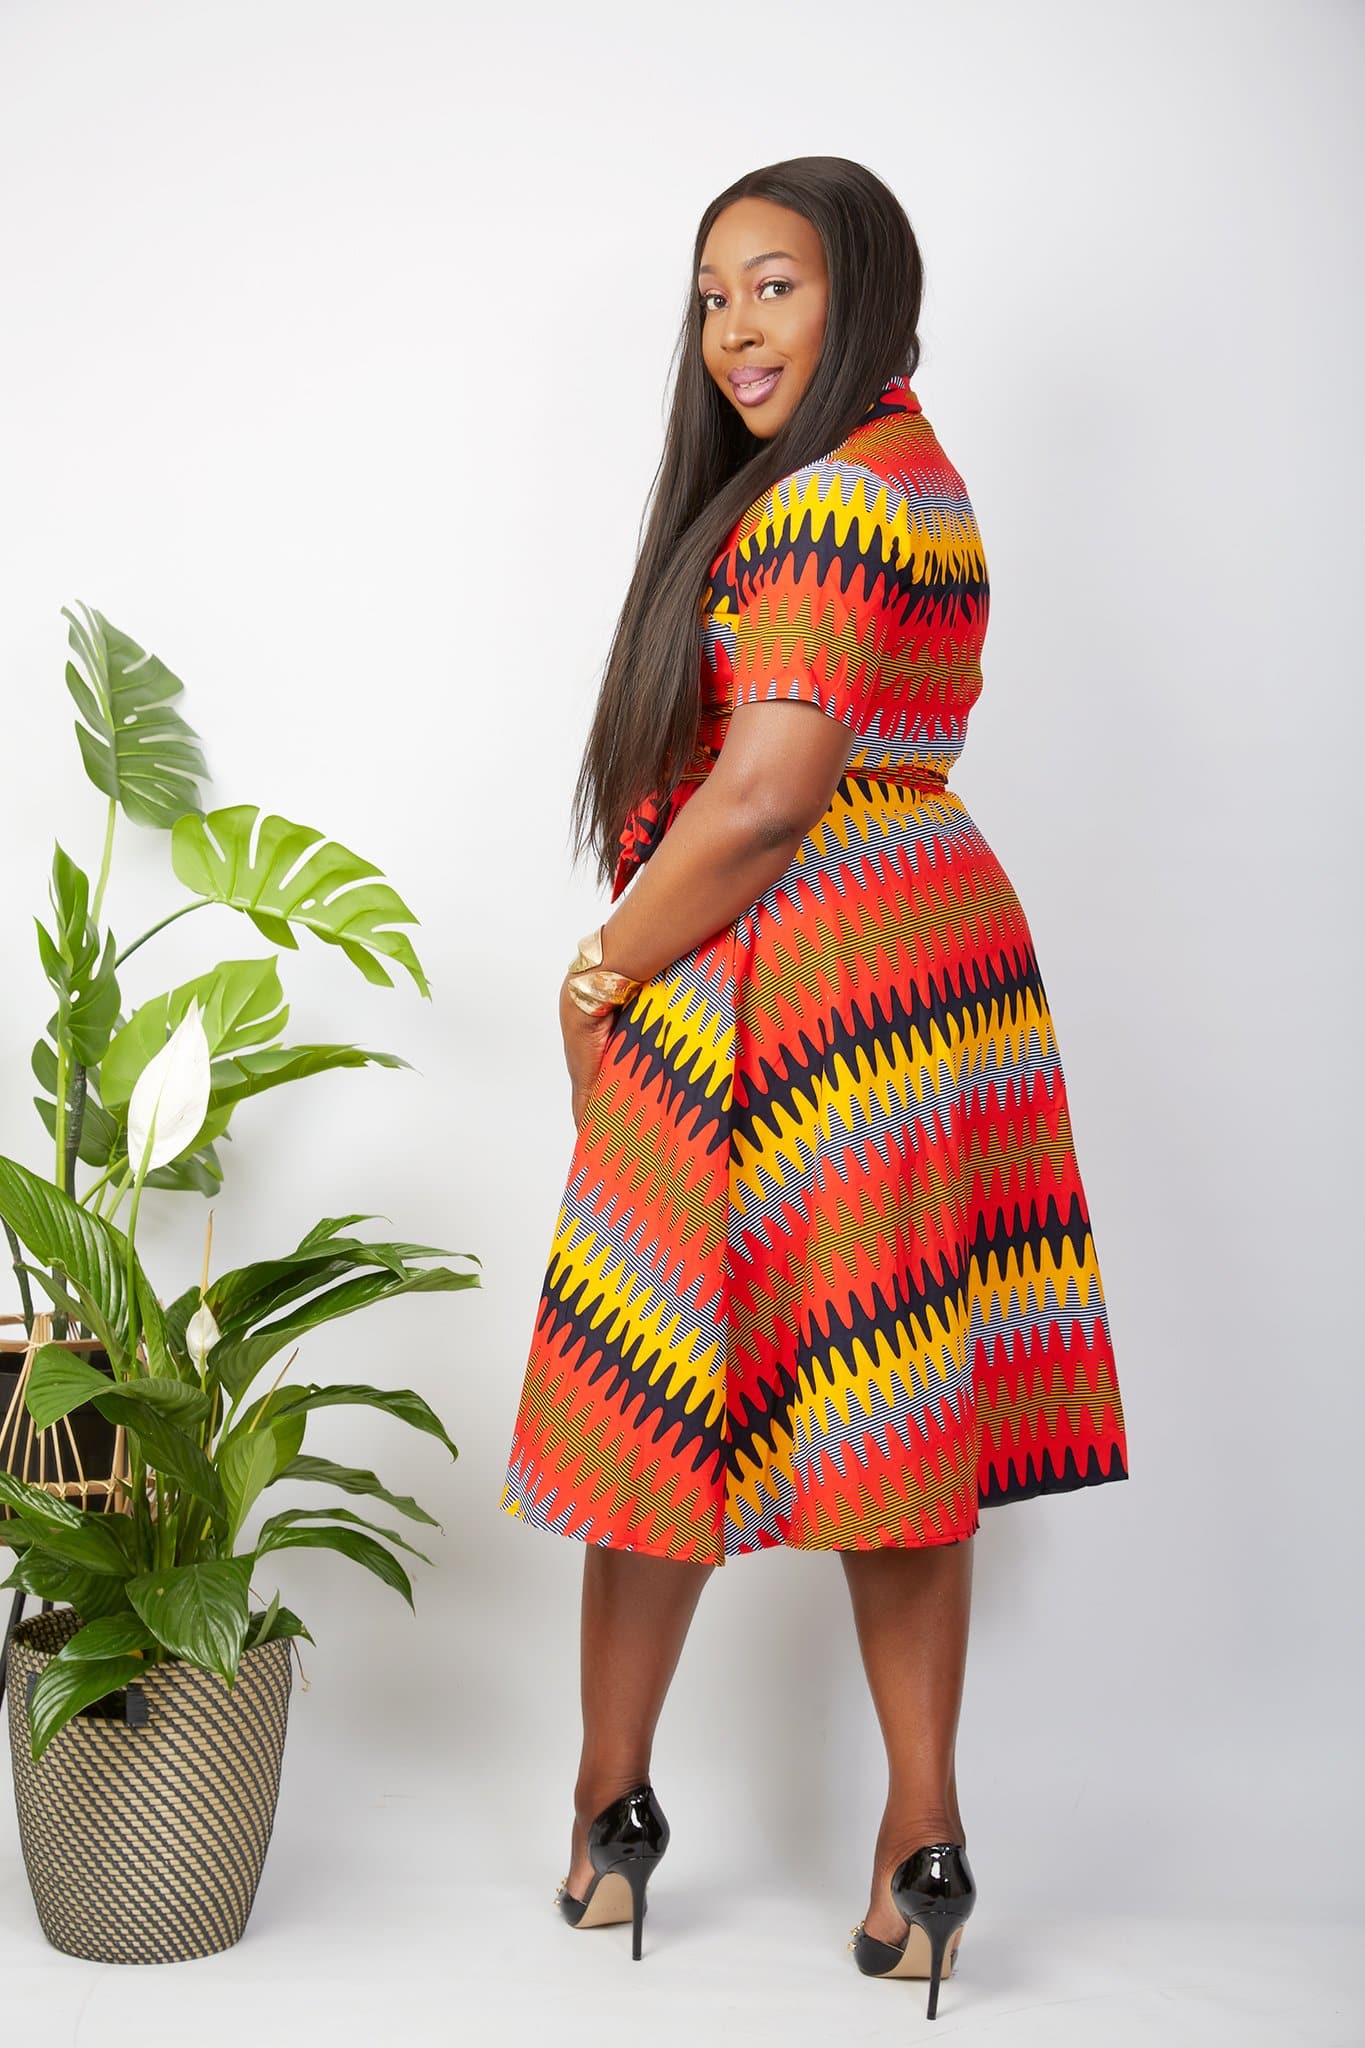 African dress styles | African clothing | african outfit | kitenge dresses | Africa Dresses for Women | Ankara Styles for ladies | African dresses for work | Danshiki Dress|Ghana African dress | Kente Dress | African dress | African print Dress | African Clothing Online  Shop | Short African dress | Mini African dress UK | African  dress UK 